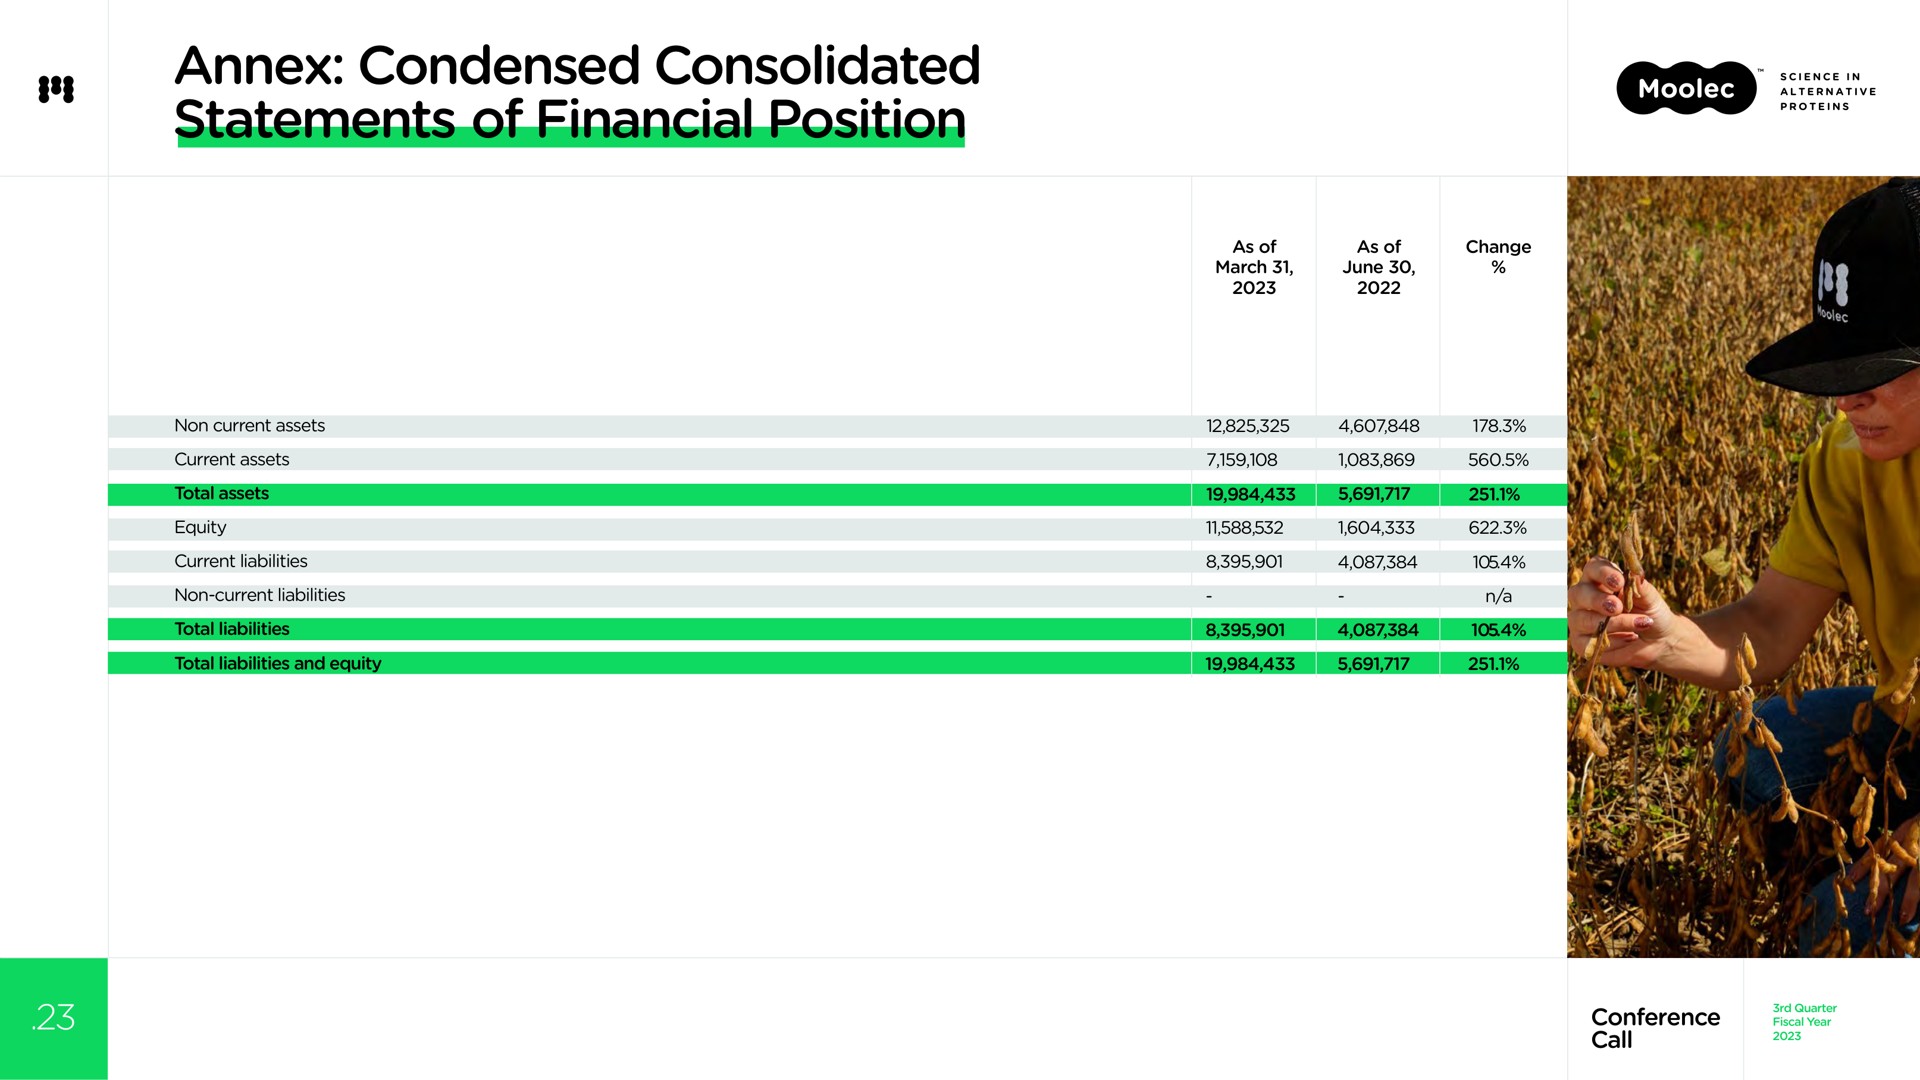 annex condensed consolidated statements of financial position | Moolec Science